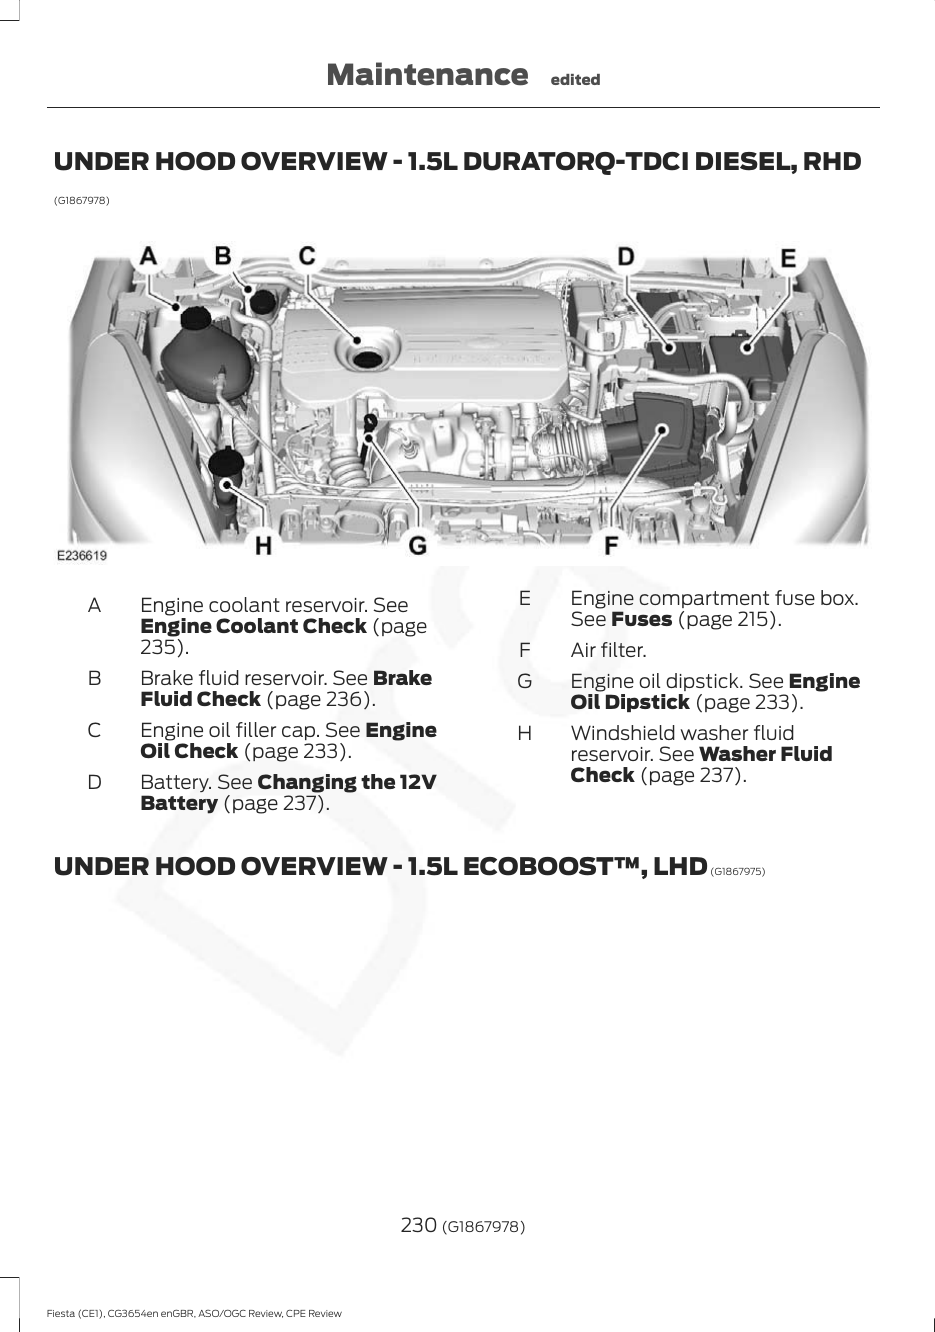 UNDER HOOD OVERVIEW - 1.5L DURATORQ-TDCI DIESEL, RHD(G1867978)Engine coolant reservoir. SeeEngine Coolant Check (page235).ABrake fluid reservoir. See BrakeFluid Check (page 236).BEngine oil filler cap. See EngineOil Check (page 233).CBattery. See Changing the 12VBattery (page 237).DEngine compartment fuse box.See Fuses (page 215).EAir filter.FEngine oil dipstick. See EngineOil Dipstick (page 233).GWindshield washer fluidreservoir. See Washer FluidCheck (page 237).HUNDER HOOD OVERVIEW - 1.5L ECOBOOST™, LHD (G1867975)230 (G1867978)Fiesta (CE1), CG3654en enGBR, ASO/OGC Review, CPE ReviewMaintenance edited